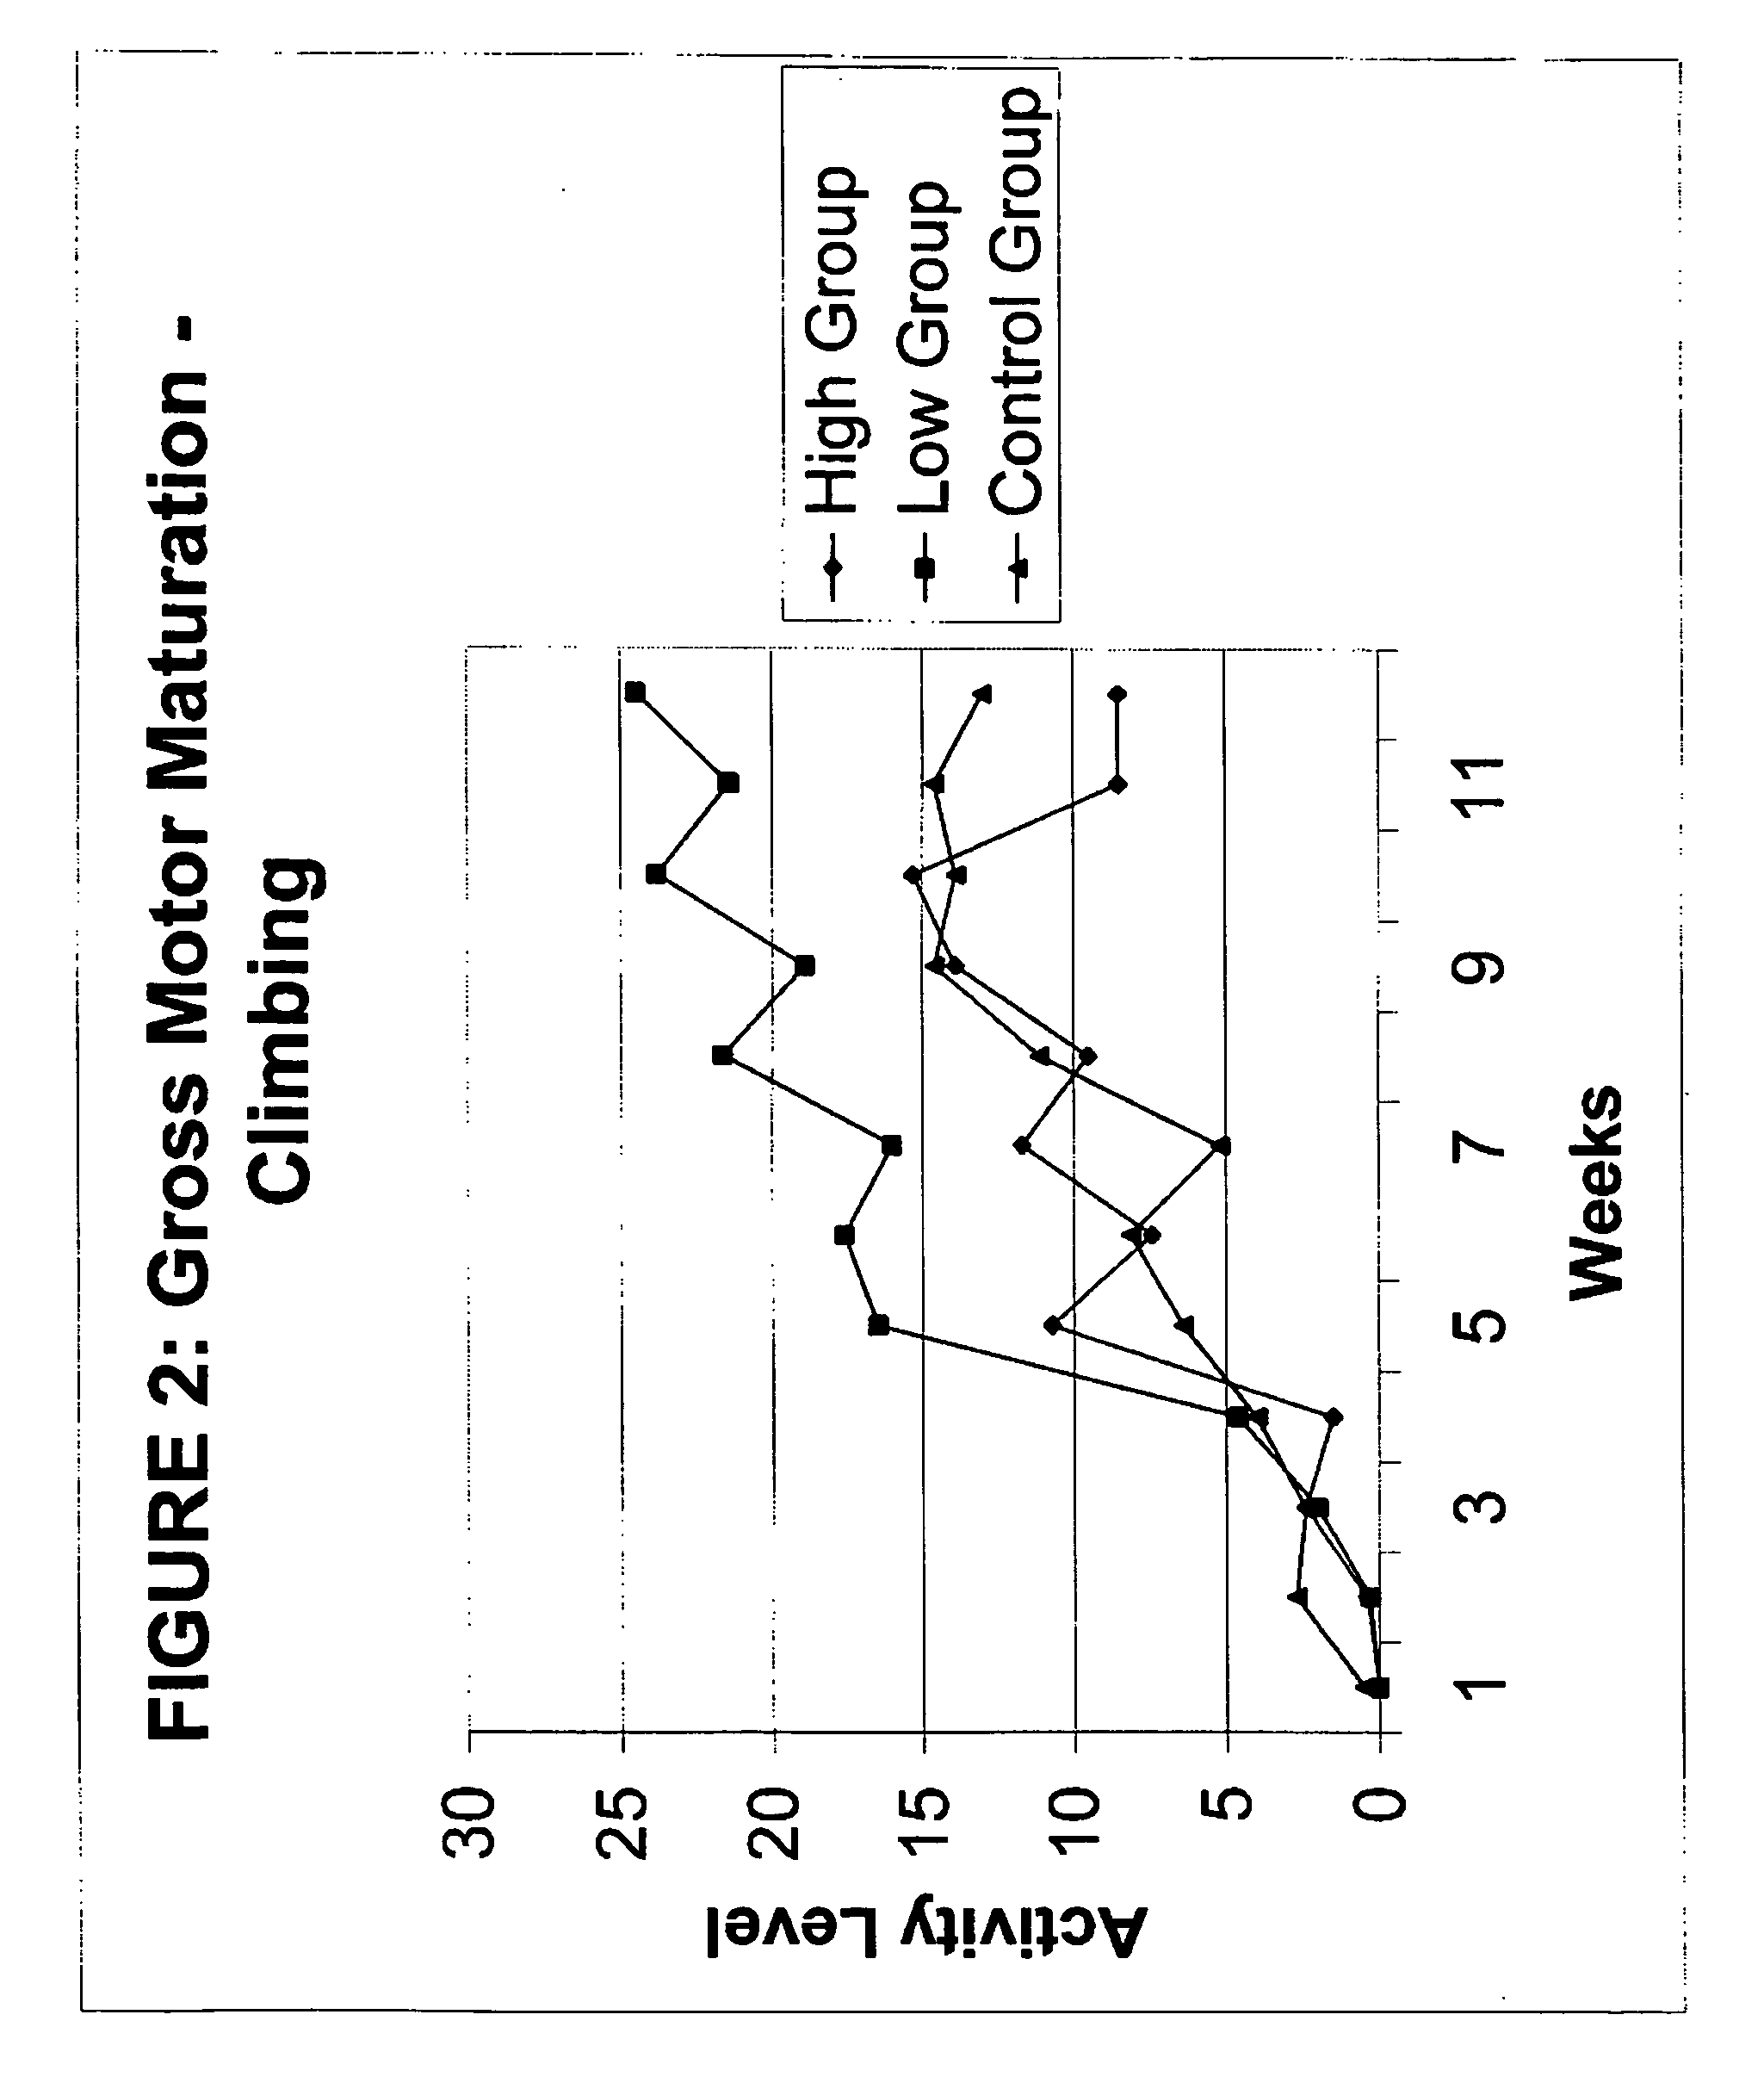 Method of reducing manganese in defatted soy isolate